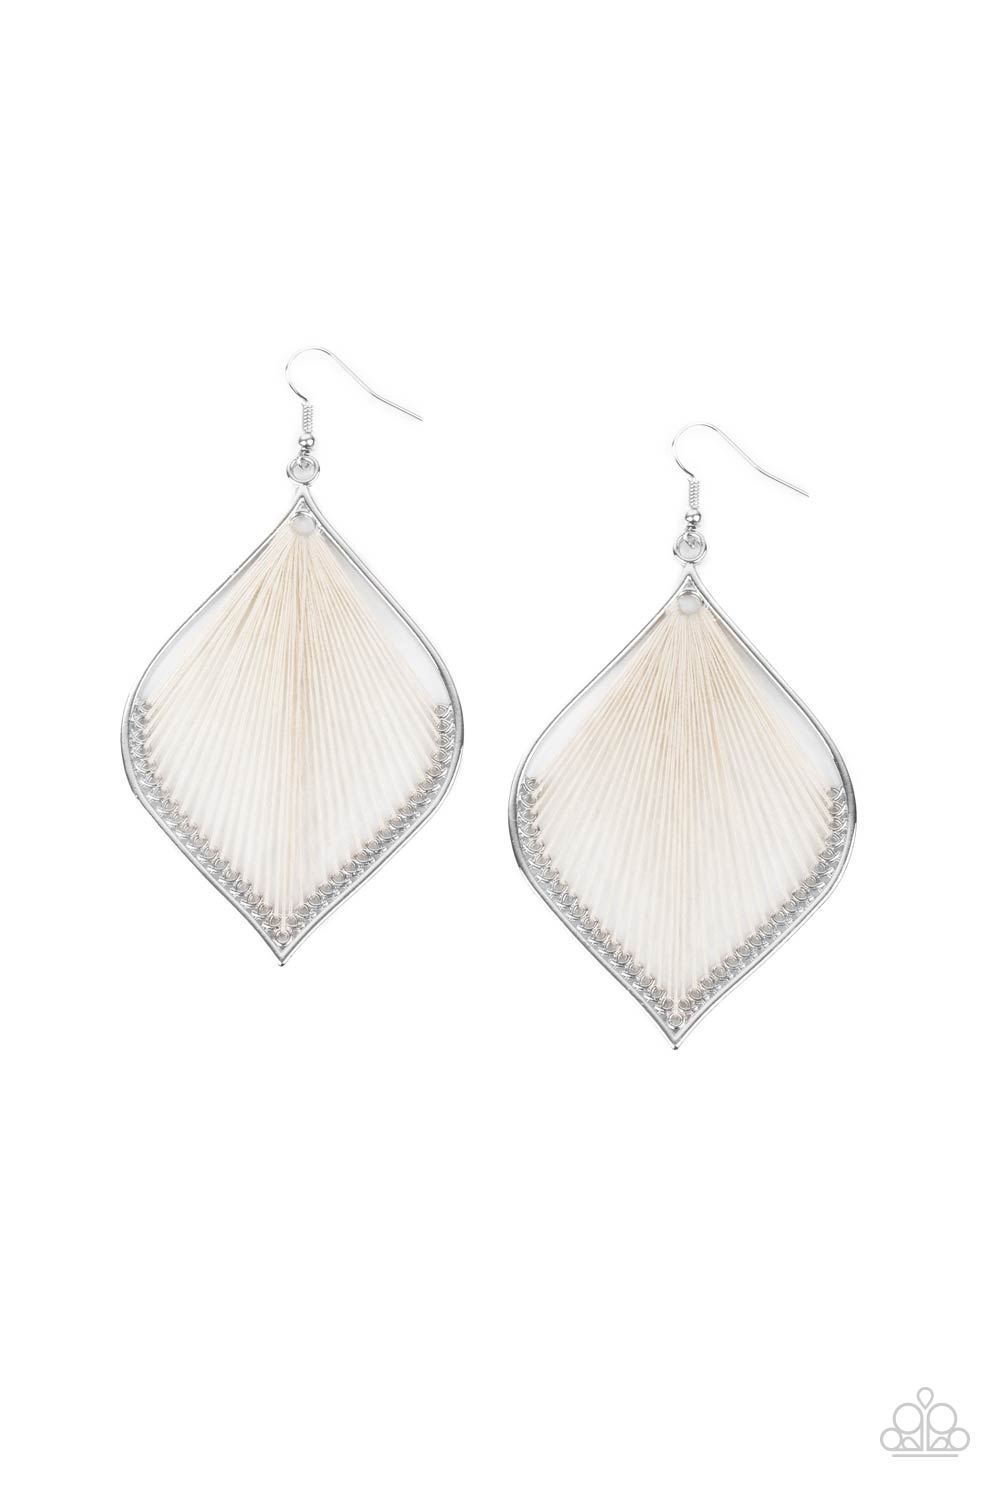 String Theory White Earrings - Paparazzi Accessories- lightbox - CarasShop.com - $5 Jewelry by Cara Jewels